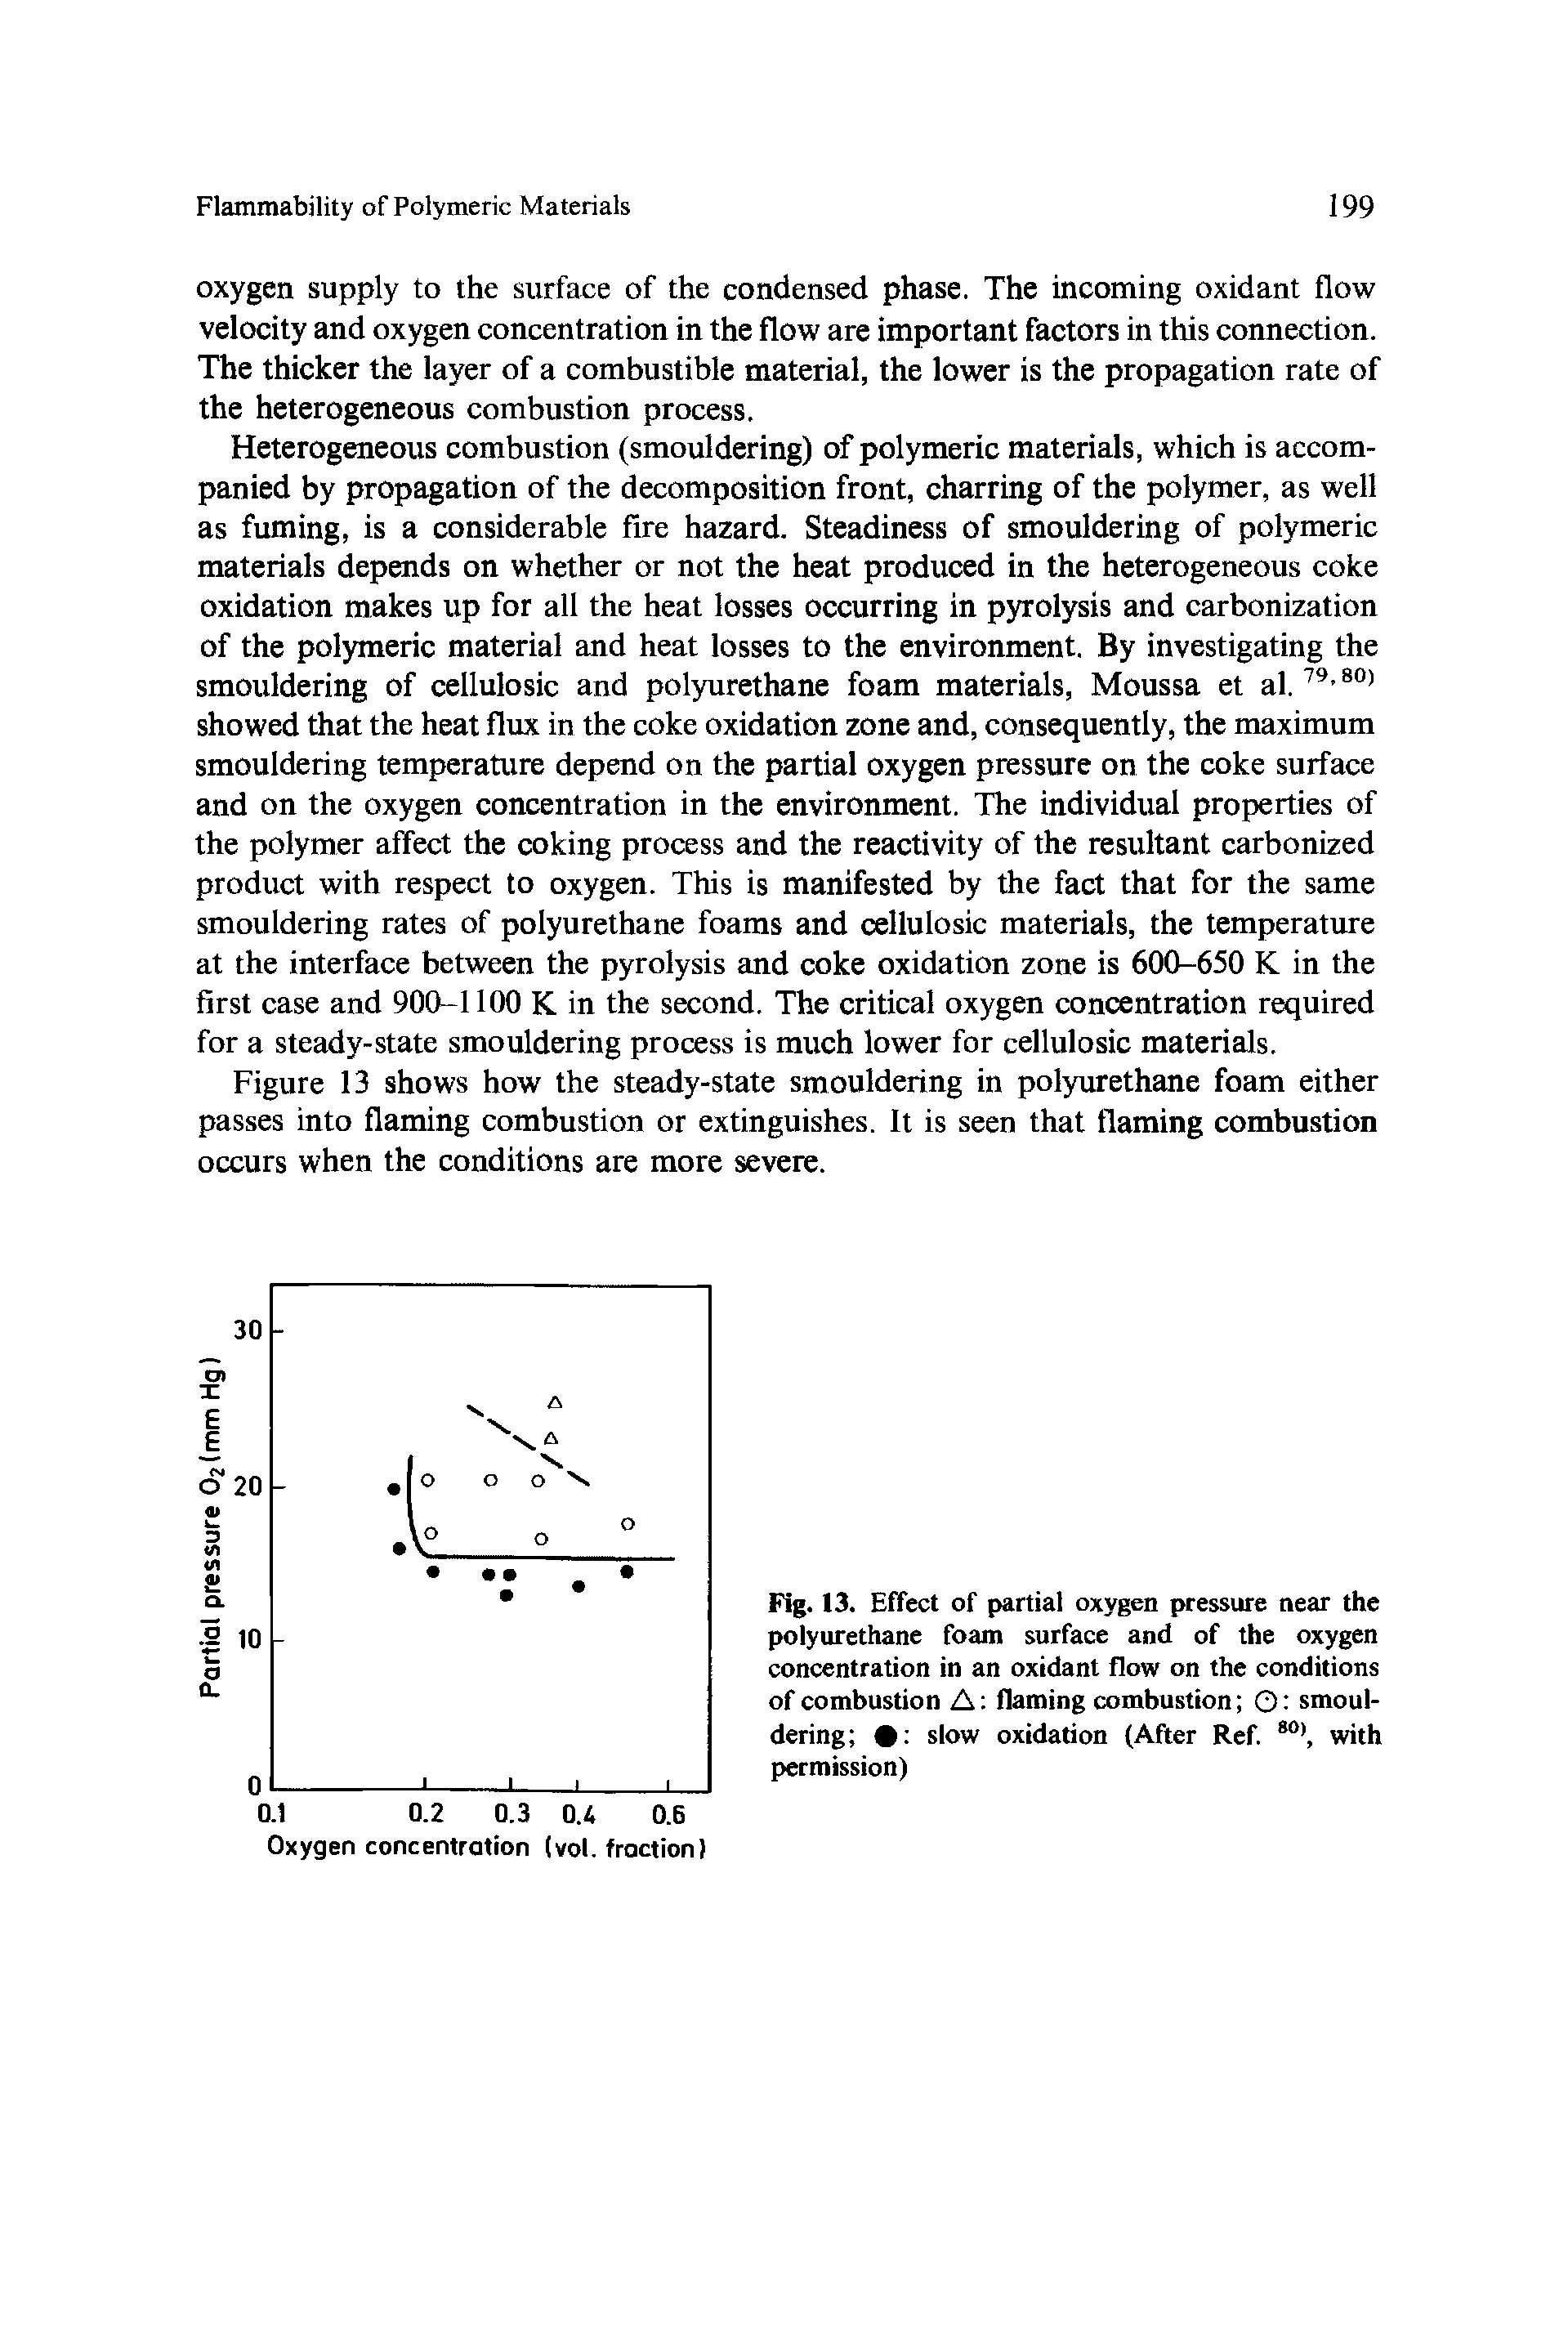 Fig. 13. Effect of partial oxygen pressure near the polyurethane foam surface and of the oxygen concentration in an oxidant flow on the conditions of combustion A flaming combustion O smouldering slow oxidation (After Ref. with permission)...